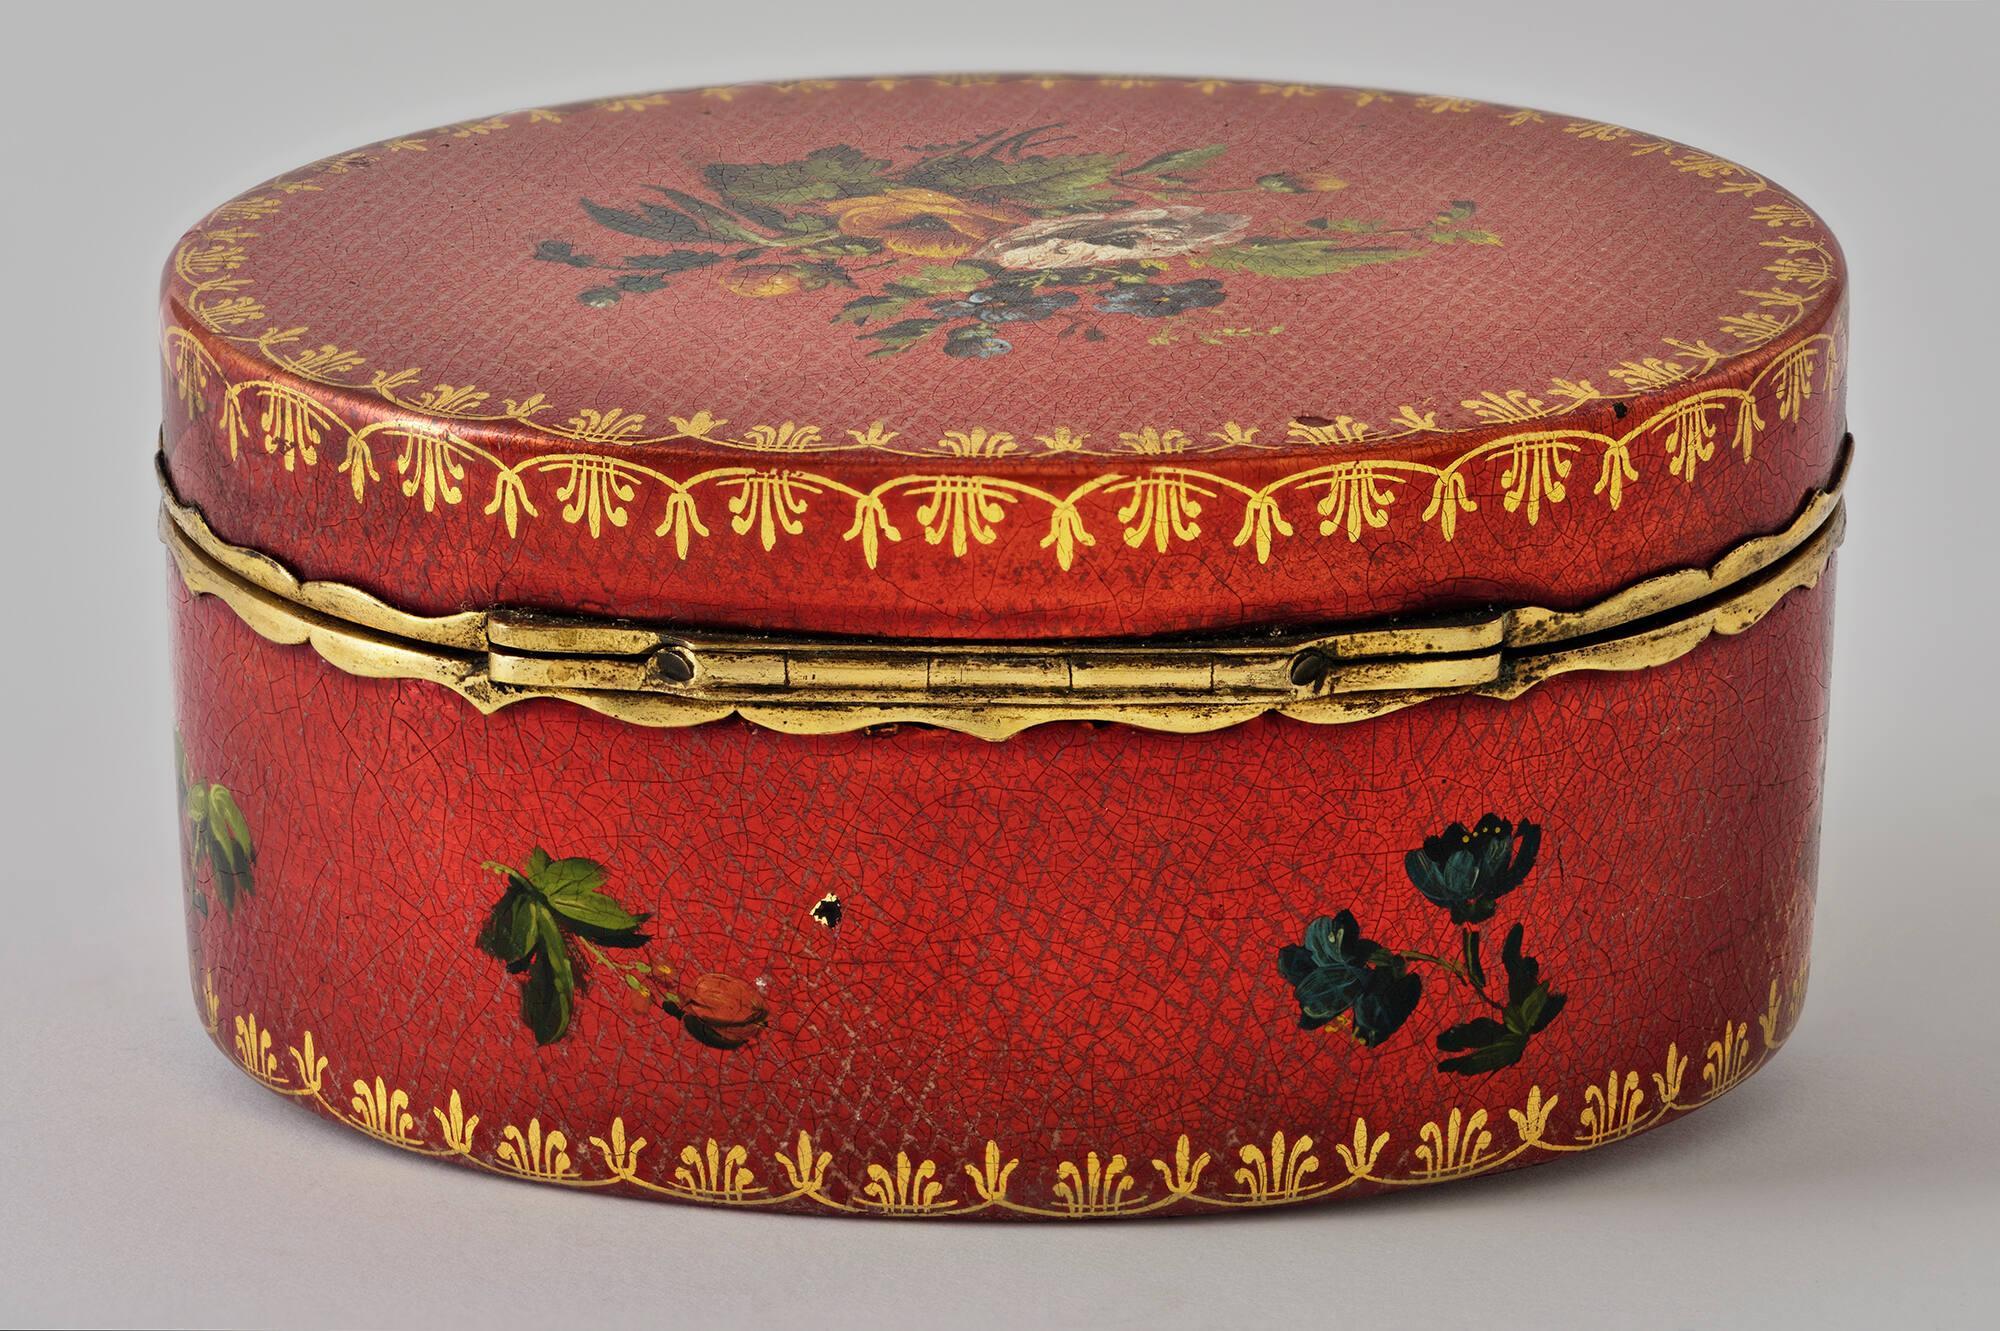 An oval red snuff box with a metal hinge and gold and floral decoration, in the Little Salon of the Gardner Museum.